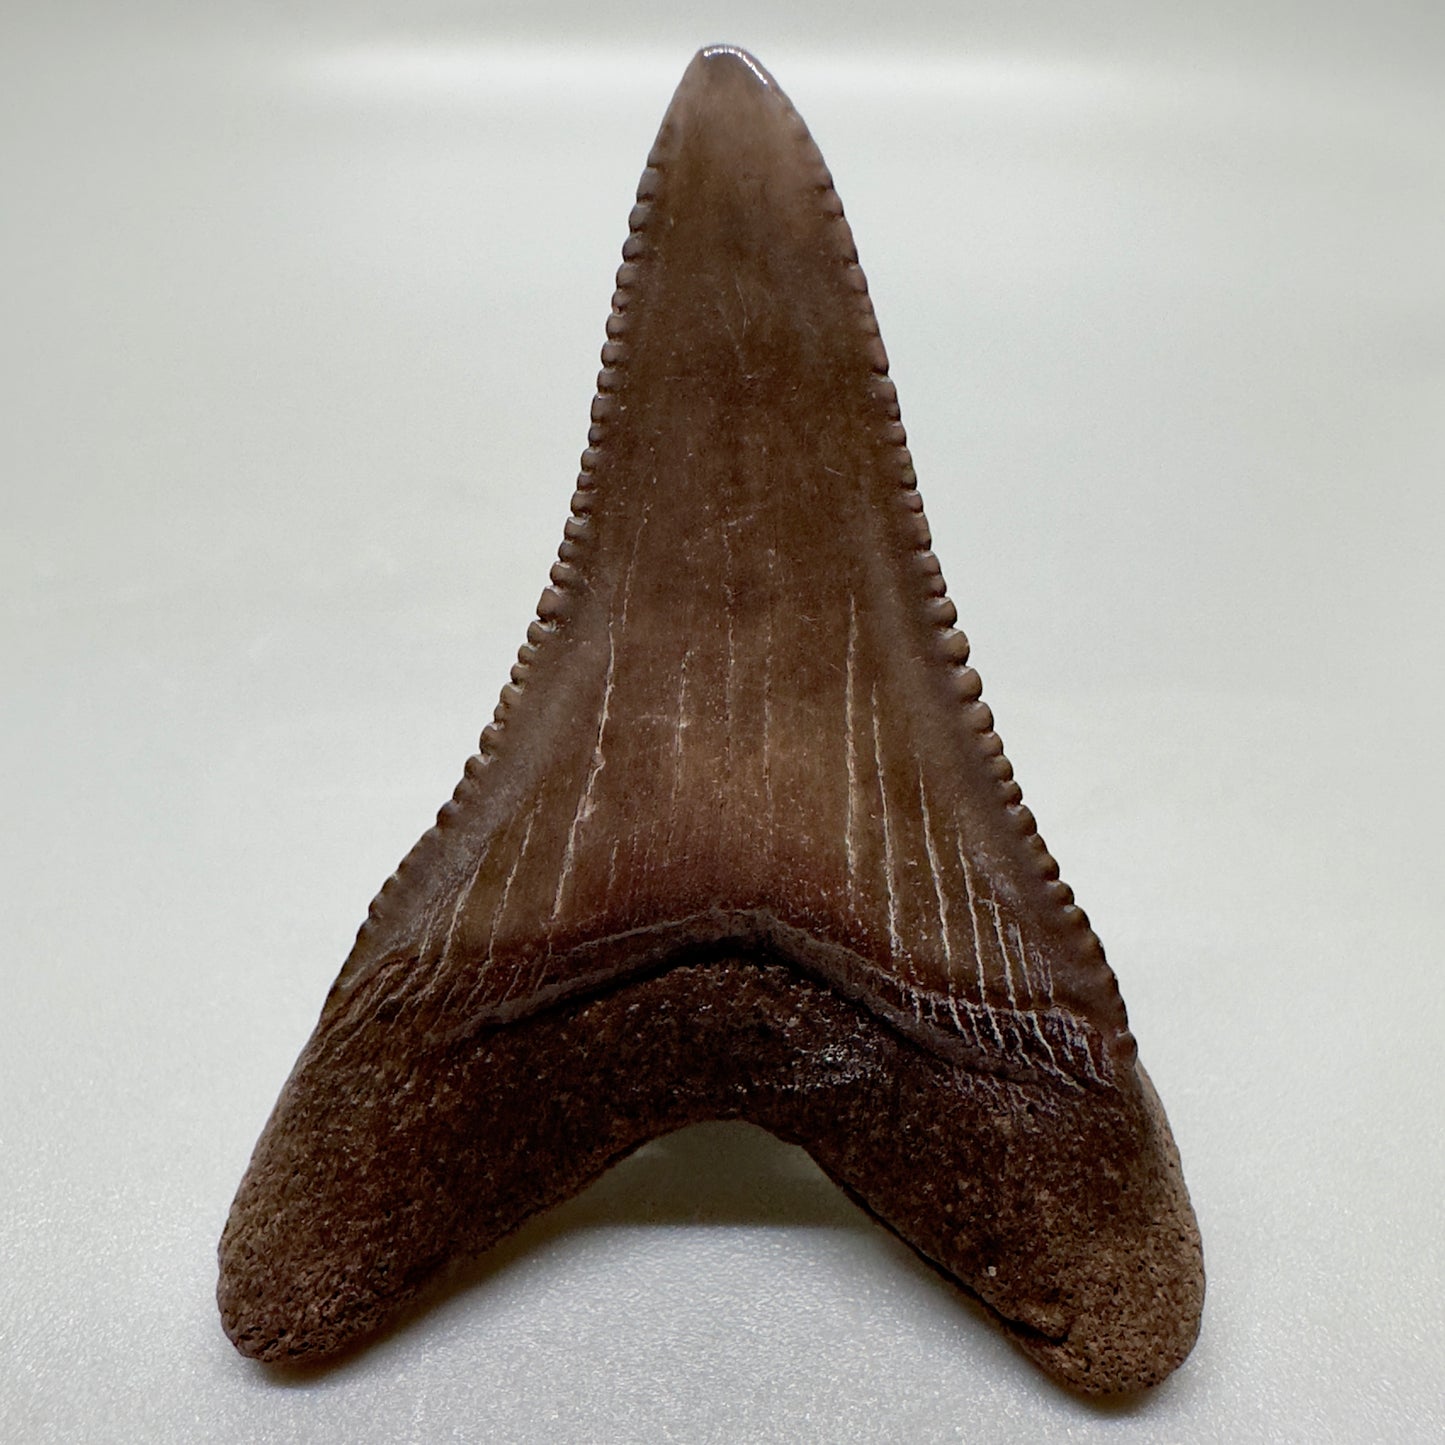 Lower, brown, serrated 1.93" Great White Tooth from Georgia GW1063 - Back